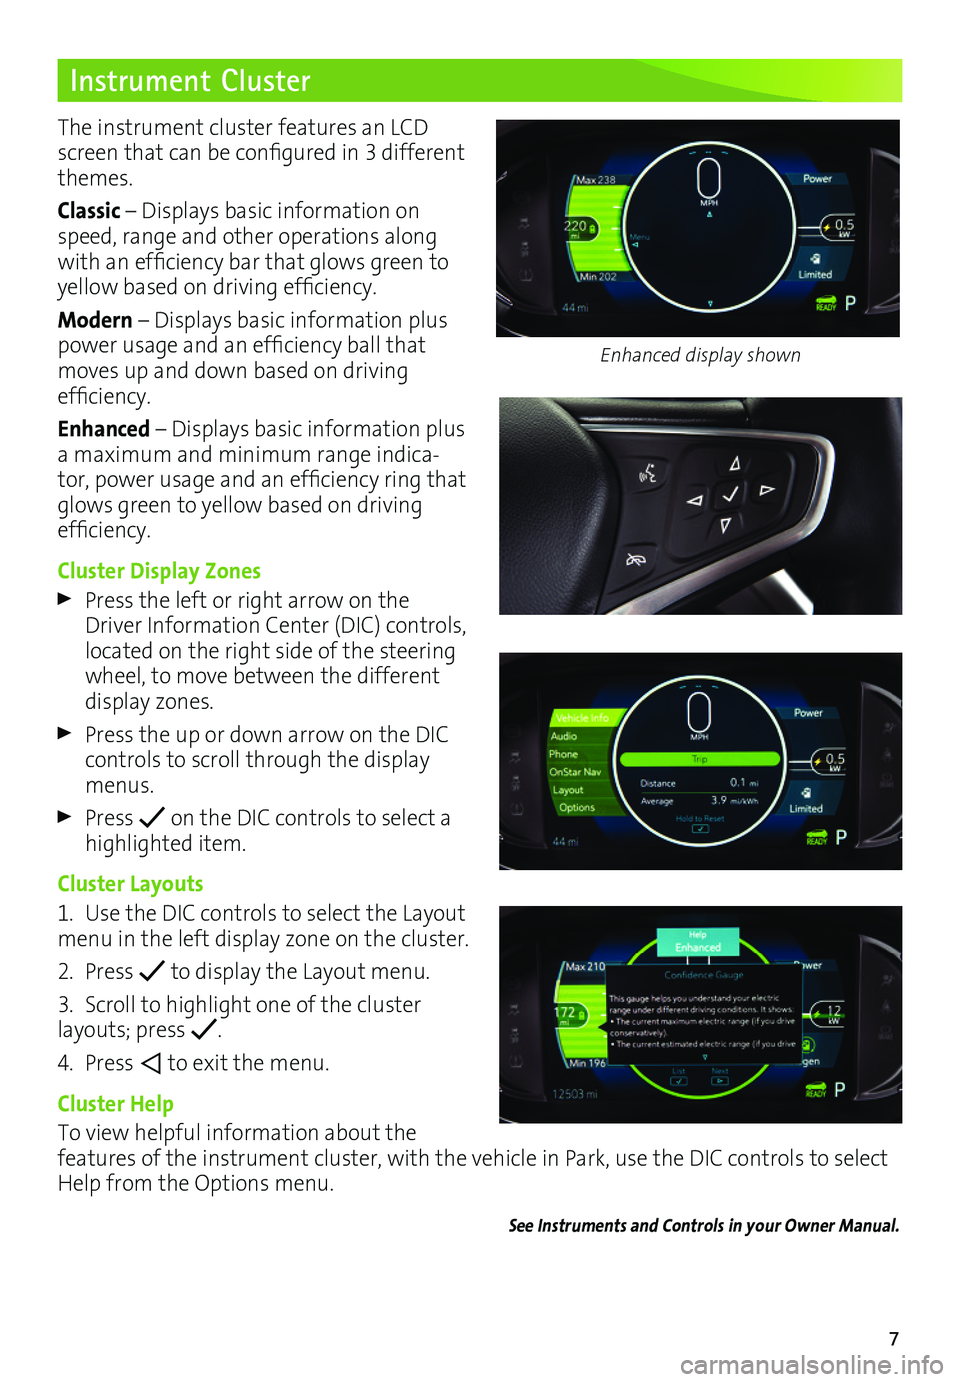 CHEVROLET BOLT EV 2017  Owners Manual 7
Instrument Cluster
The instrument cluster features an LCD screen that can be configured in 3 different themes.
Classic – Displays basic information on speed, range and other operations along with 